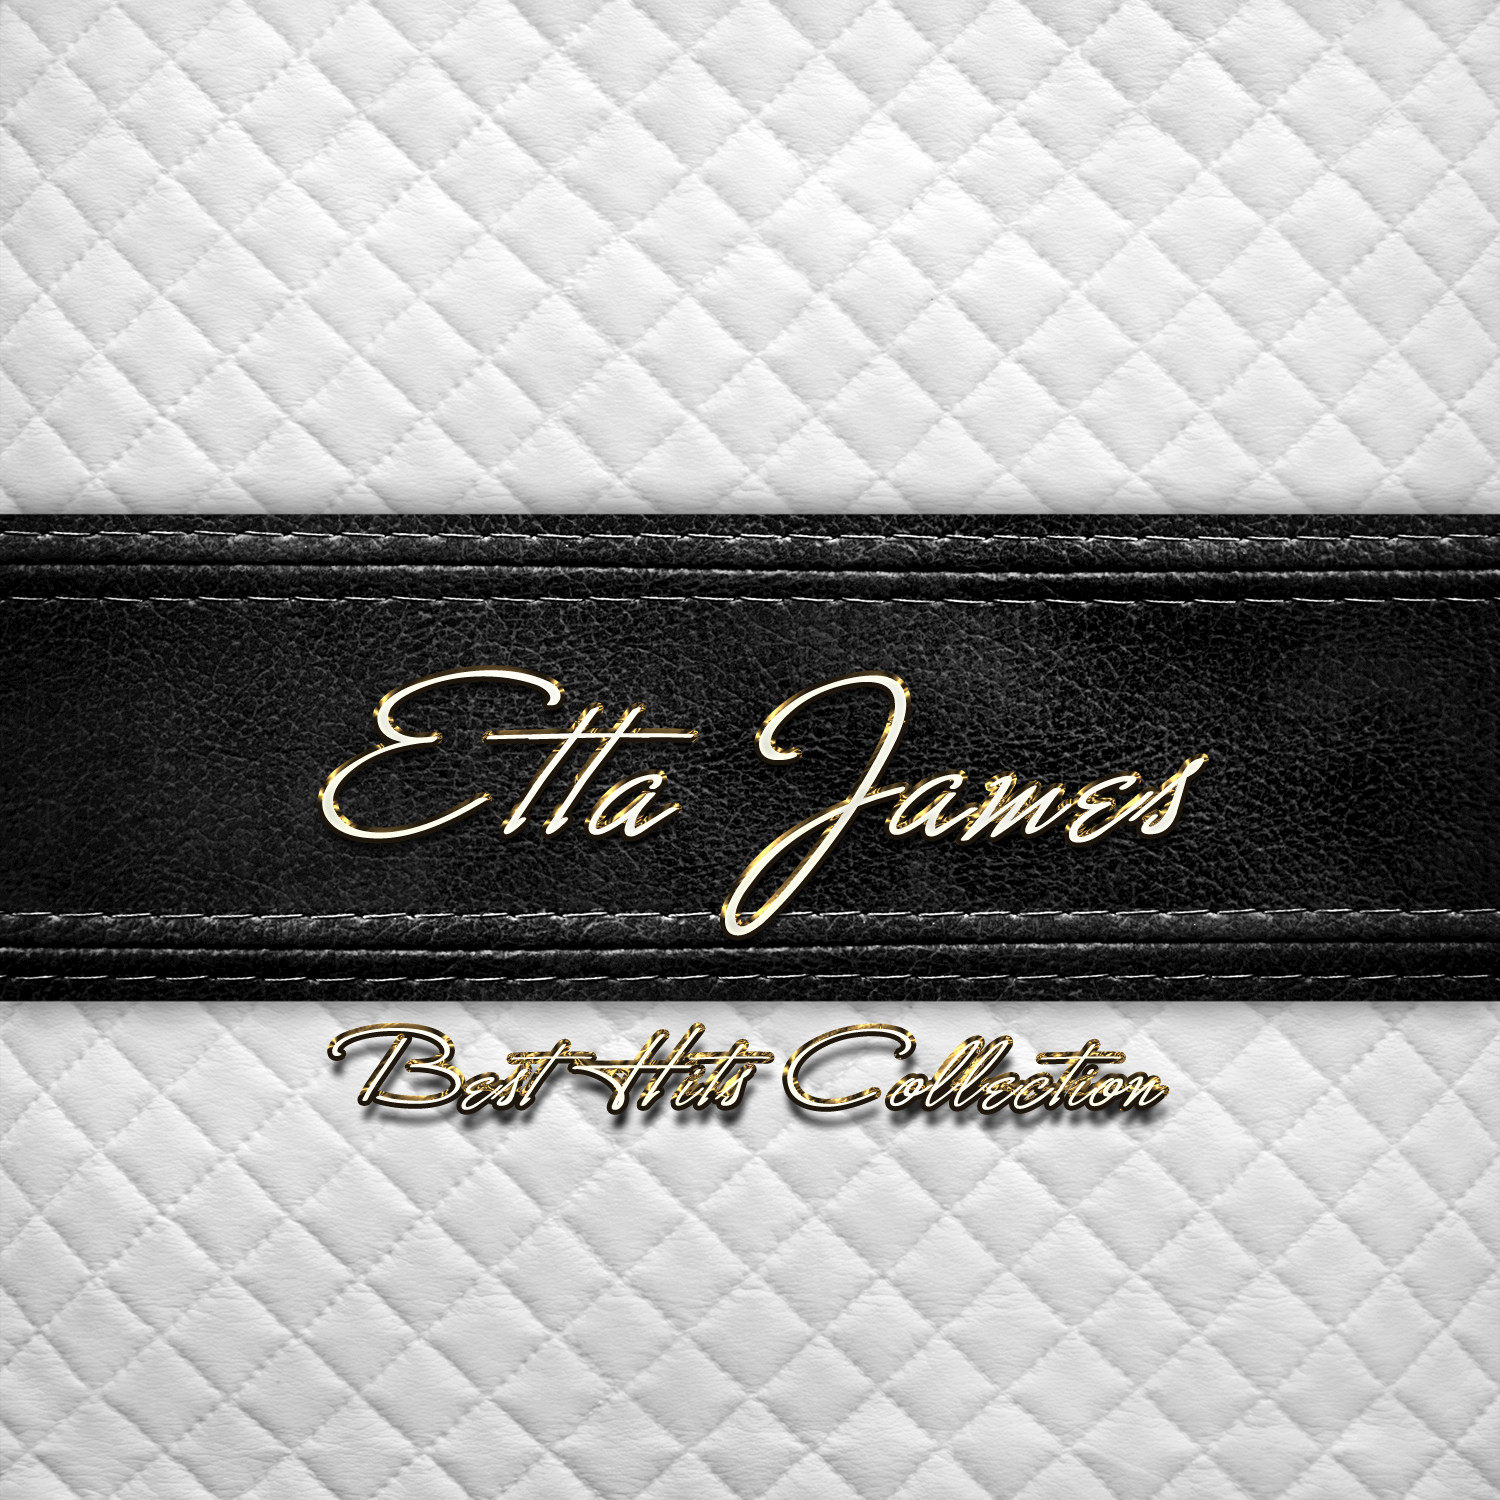 Best Hits Collection of Etta James